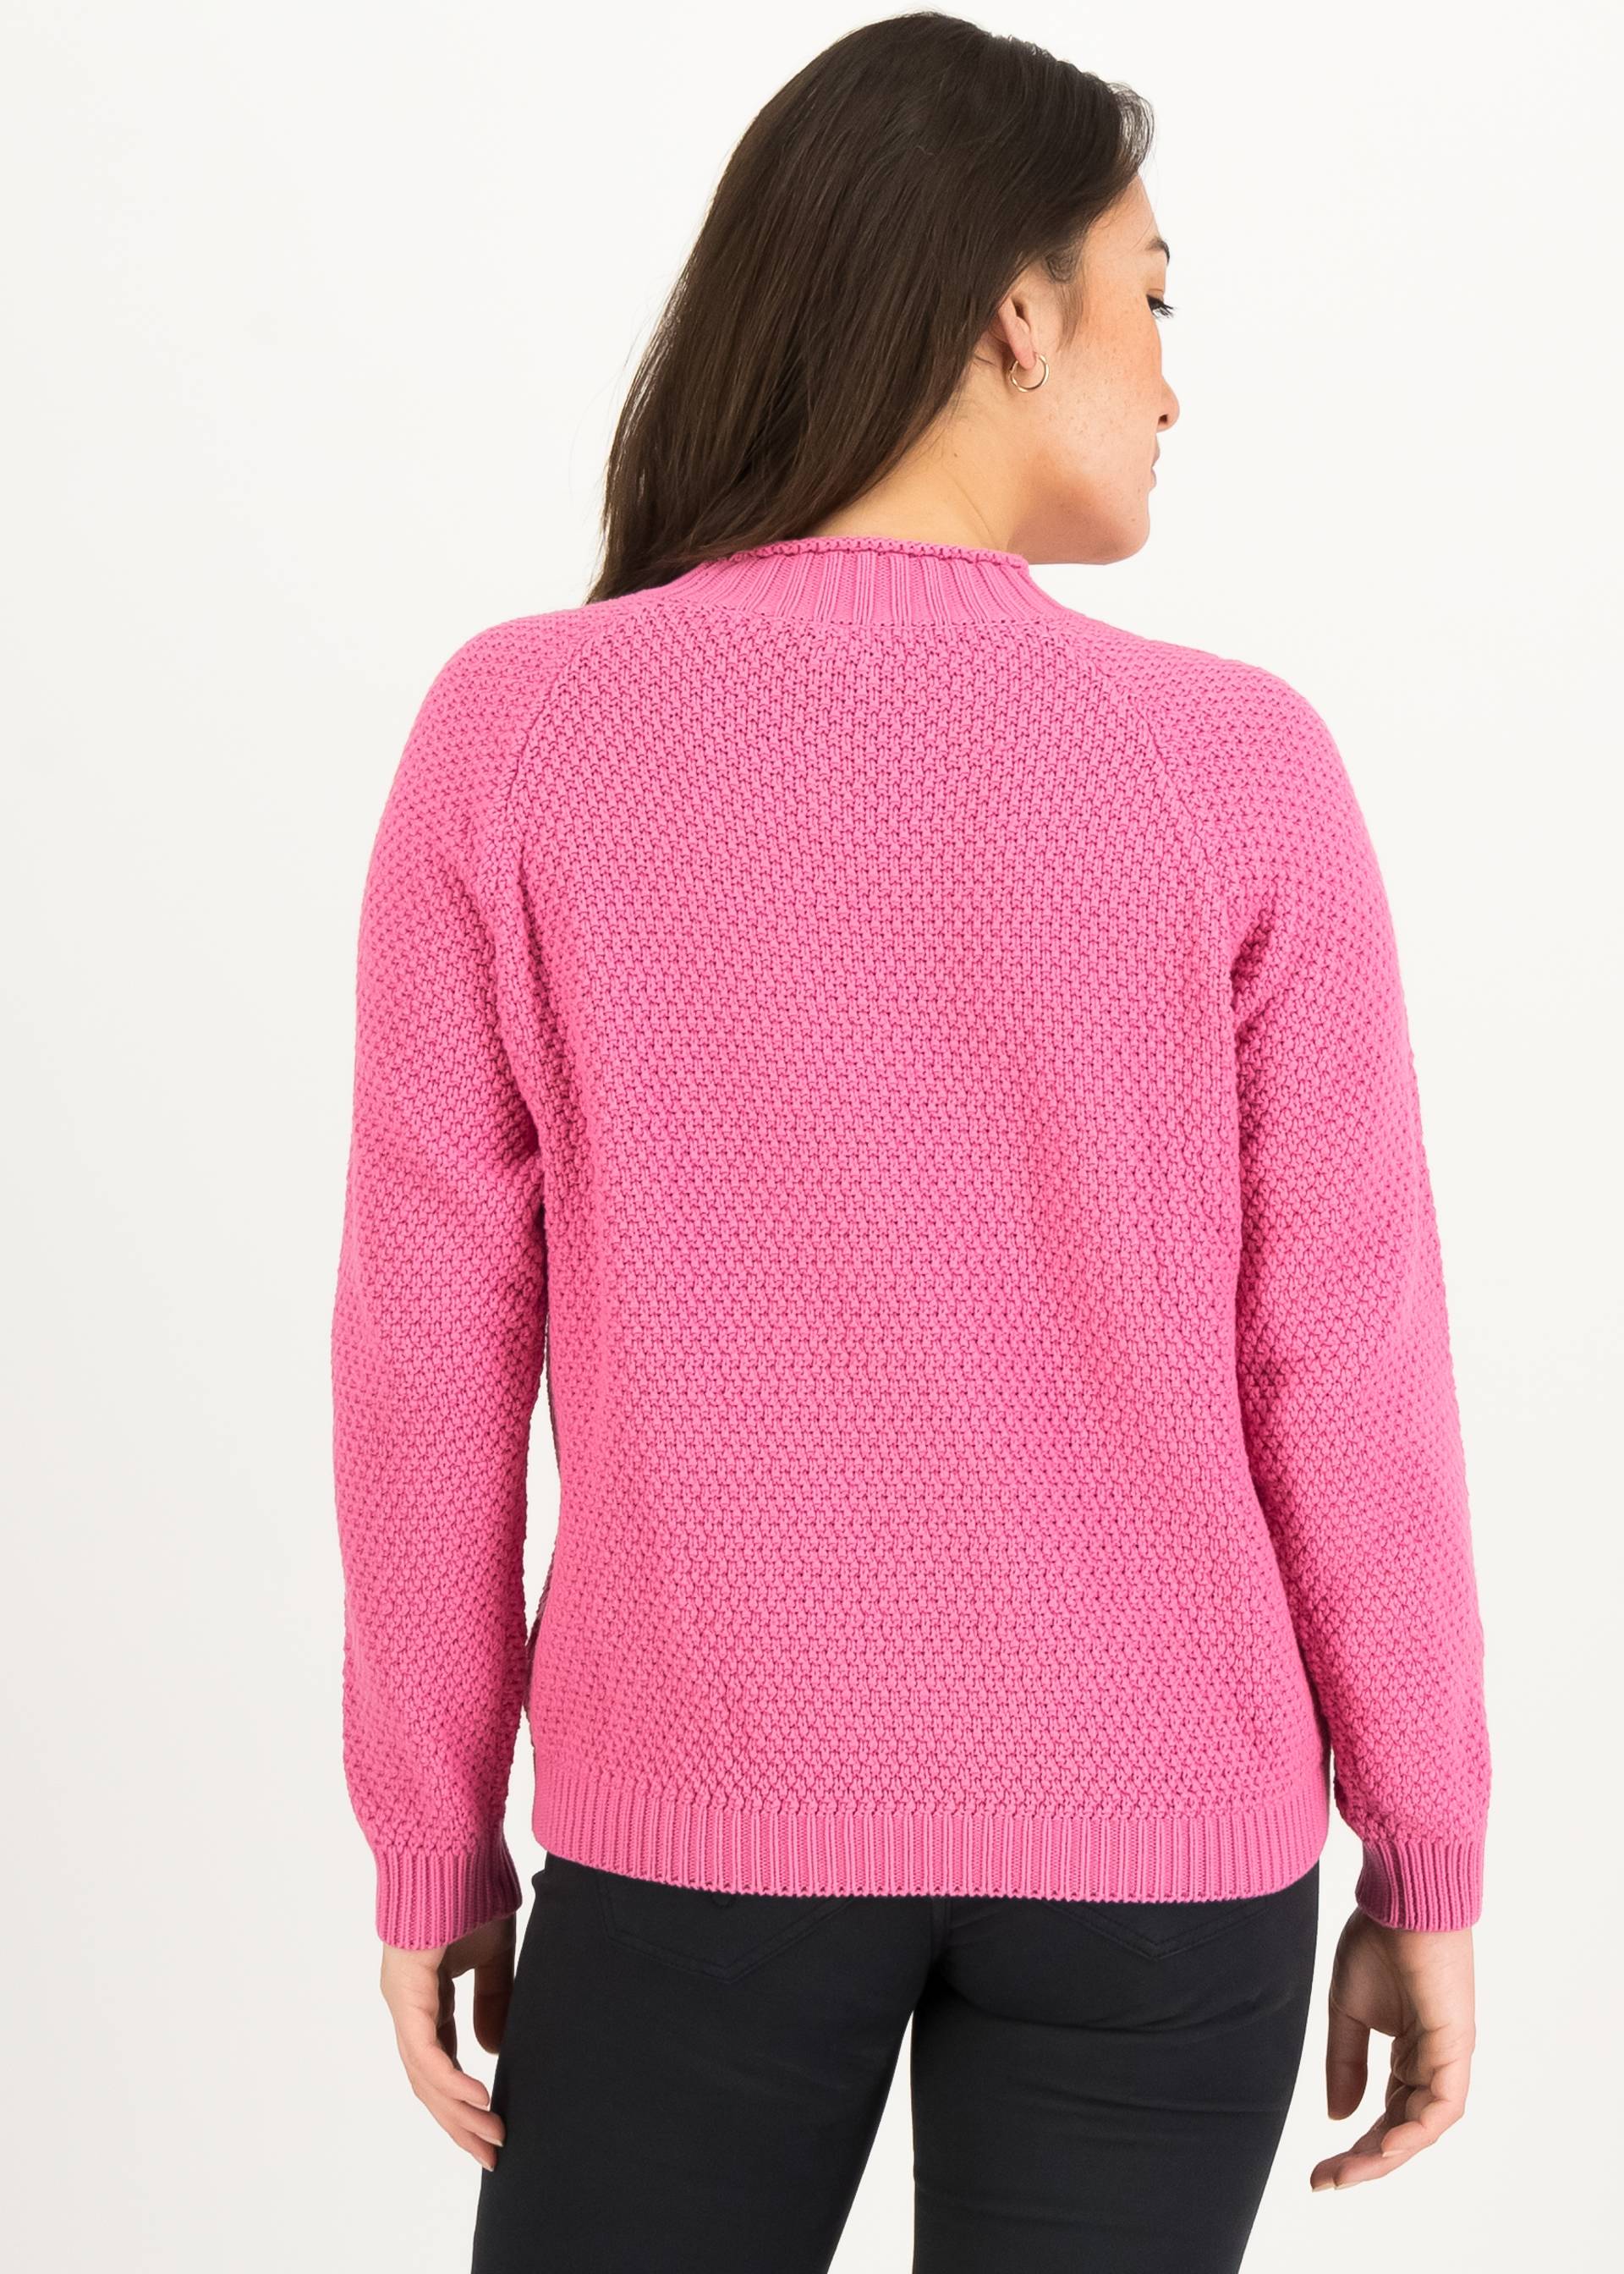 Knitted Jumper hurly burly Knit Knot, on fire pink, Knitted Jumpers & Cardigans, Pink